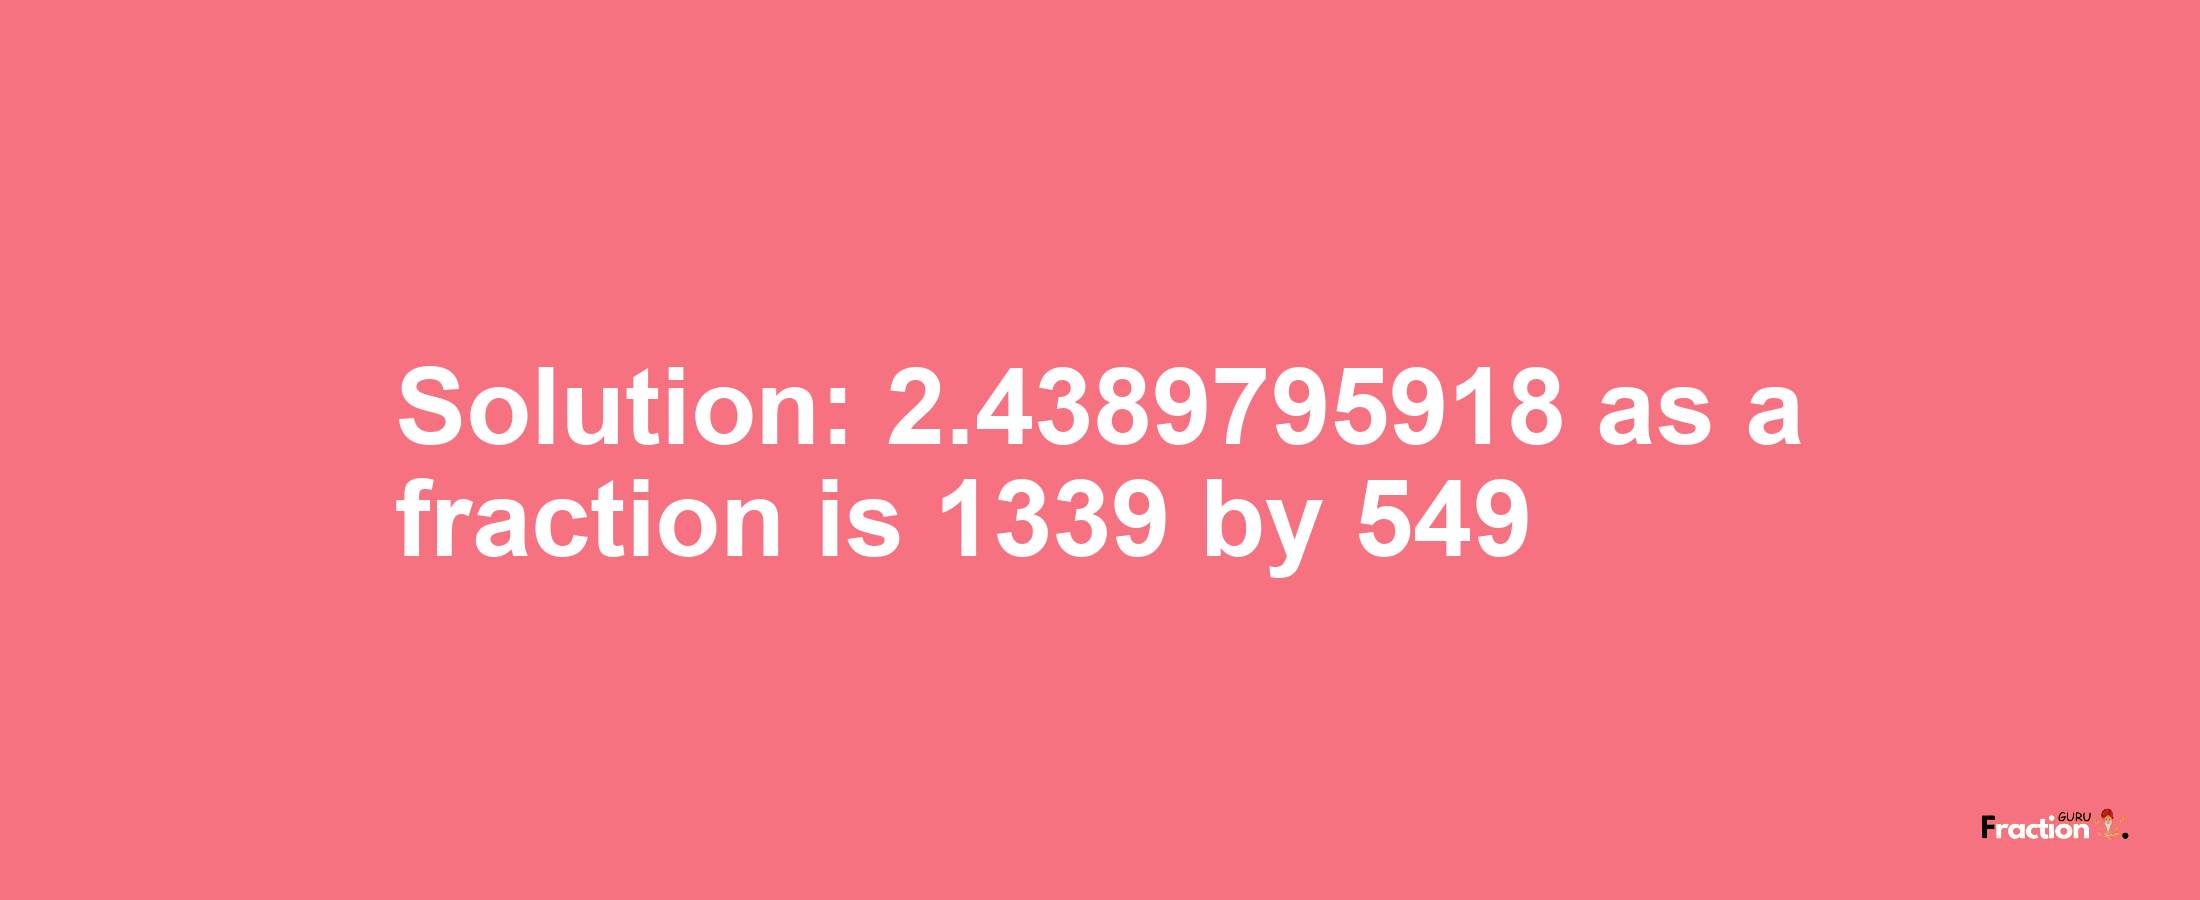 Solution:2.4389795918 as a fraction is 1339/549